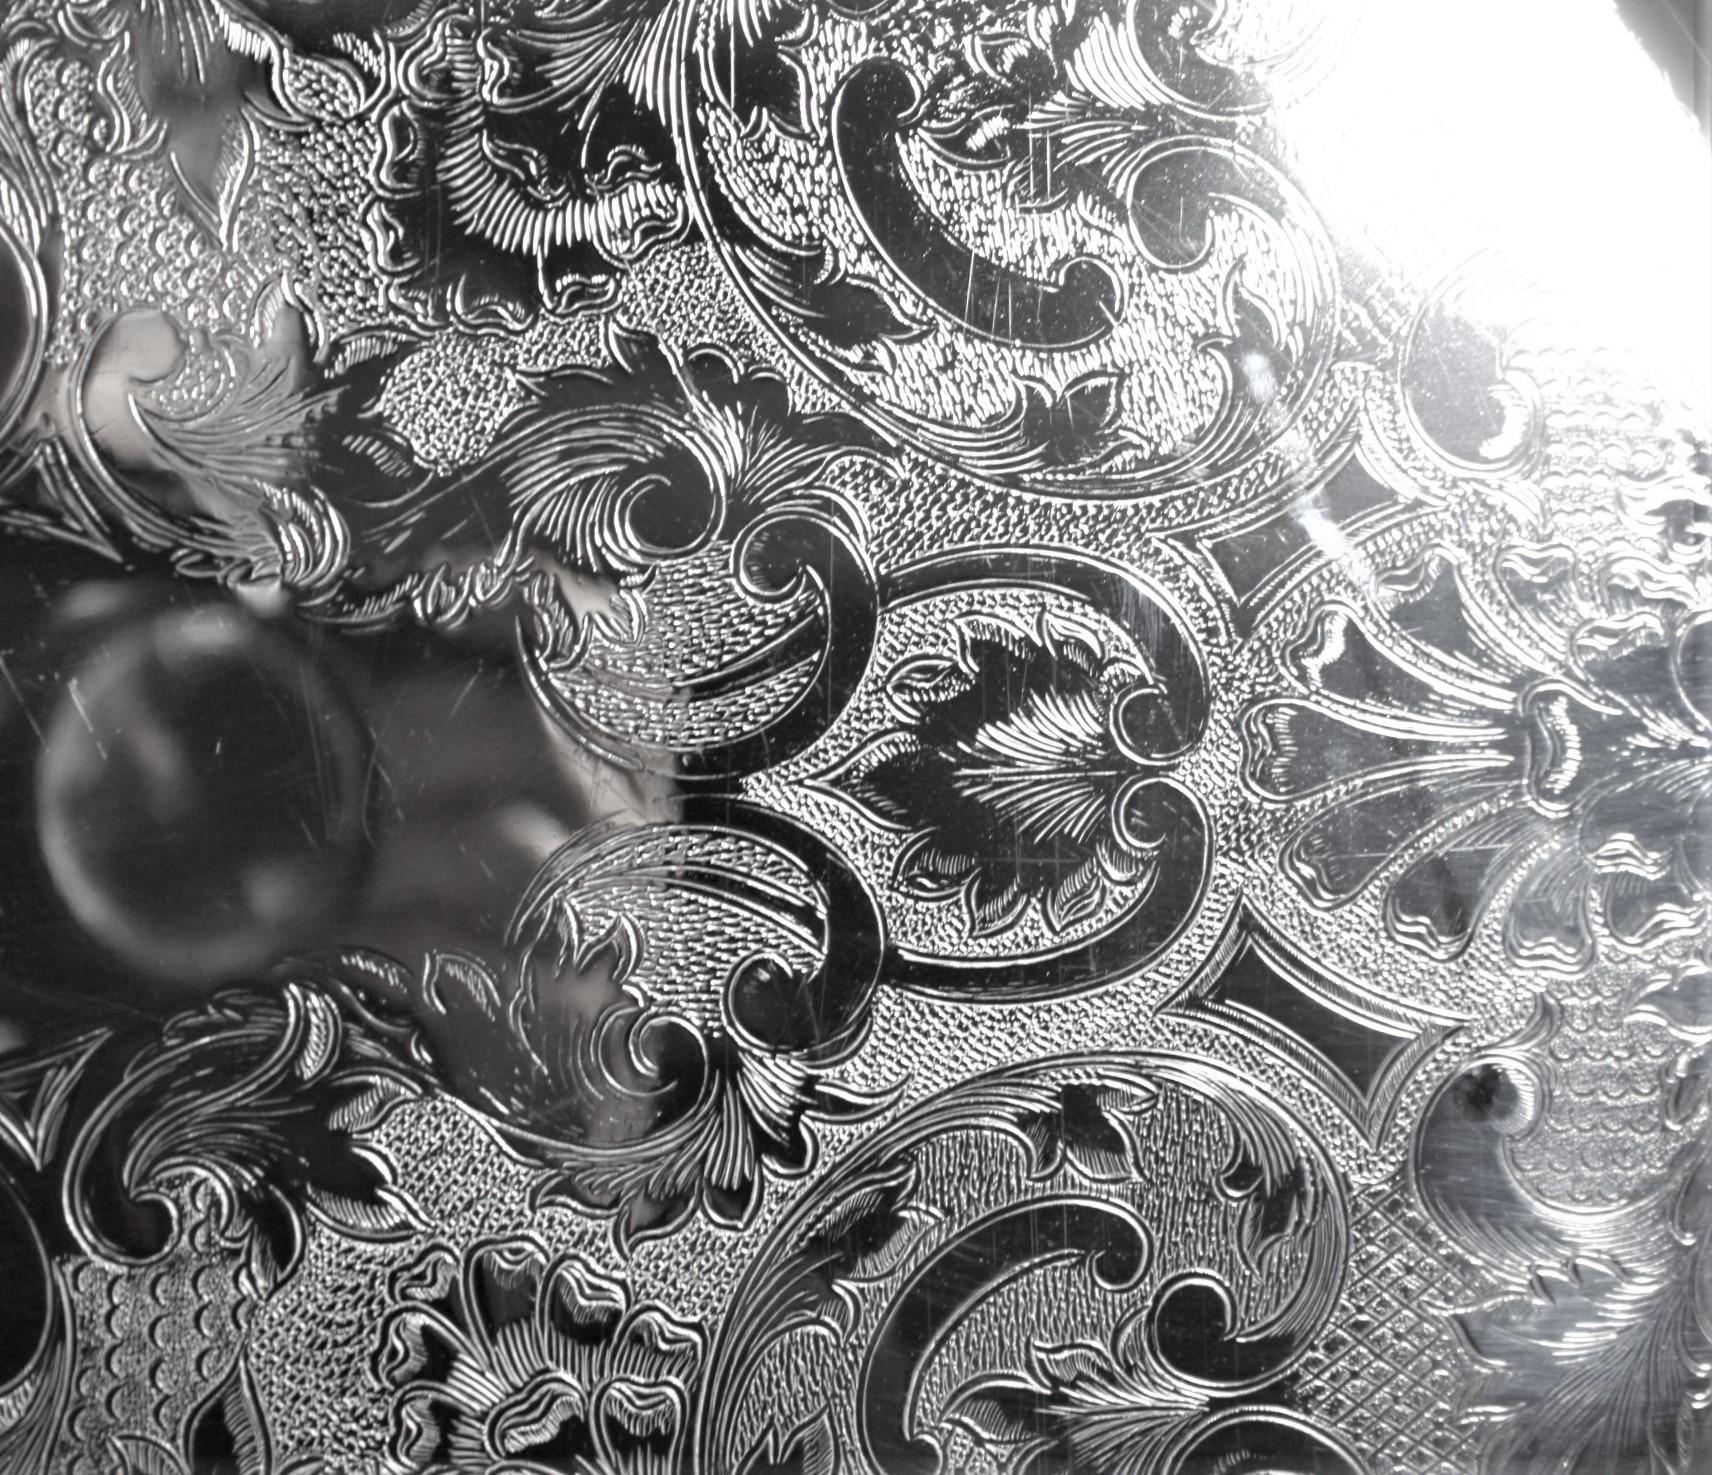 Antique English Silver Plated Footed Gallery Serving Tray with Ornate Engraving For Sale 2